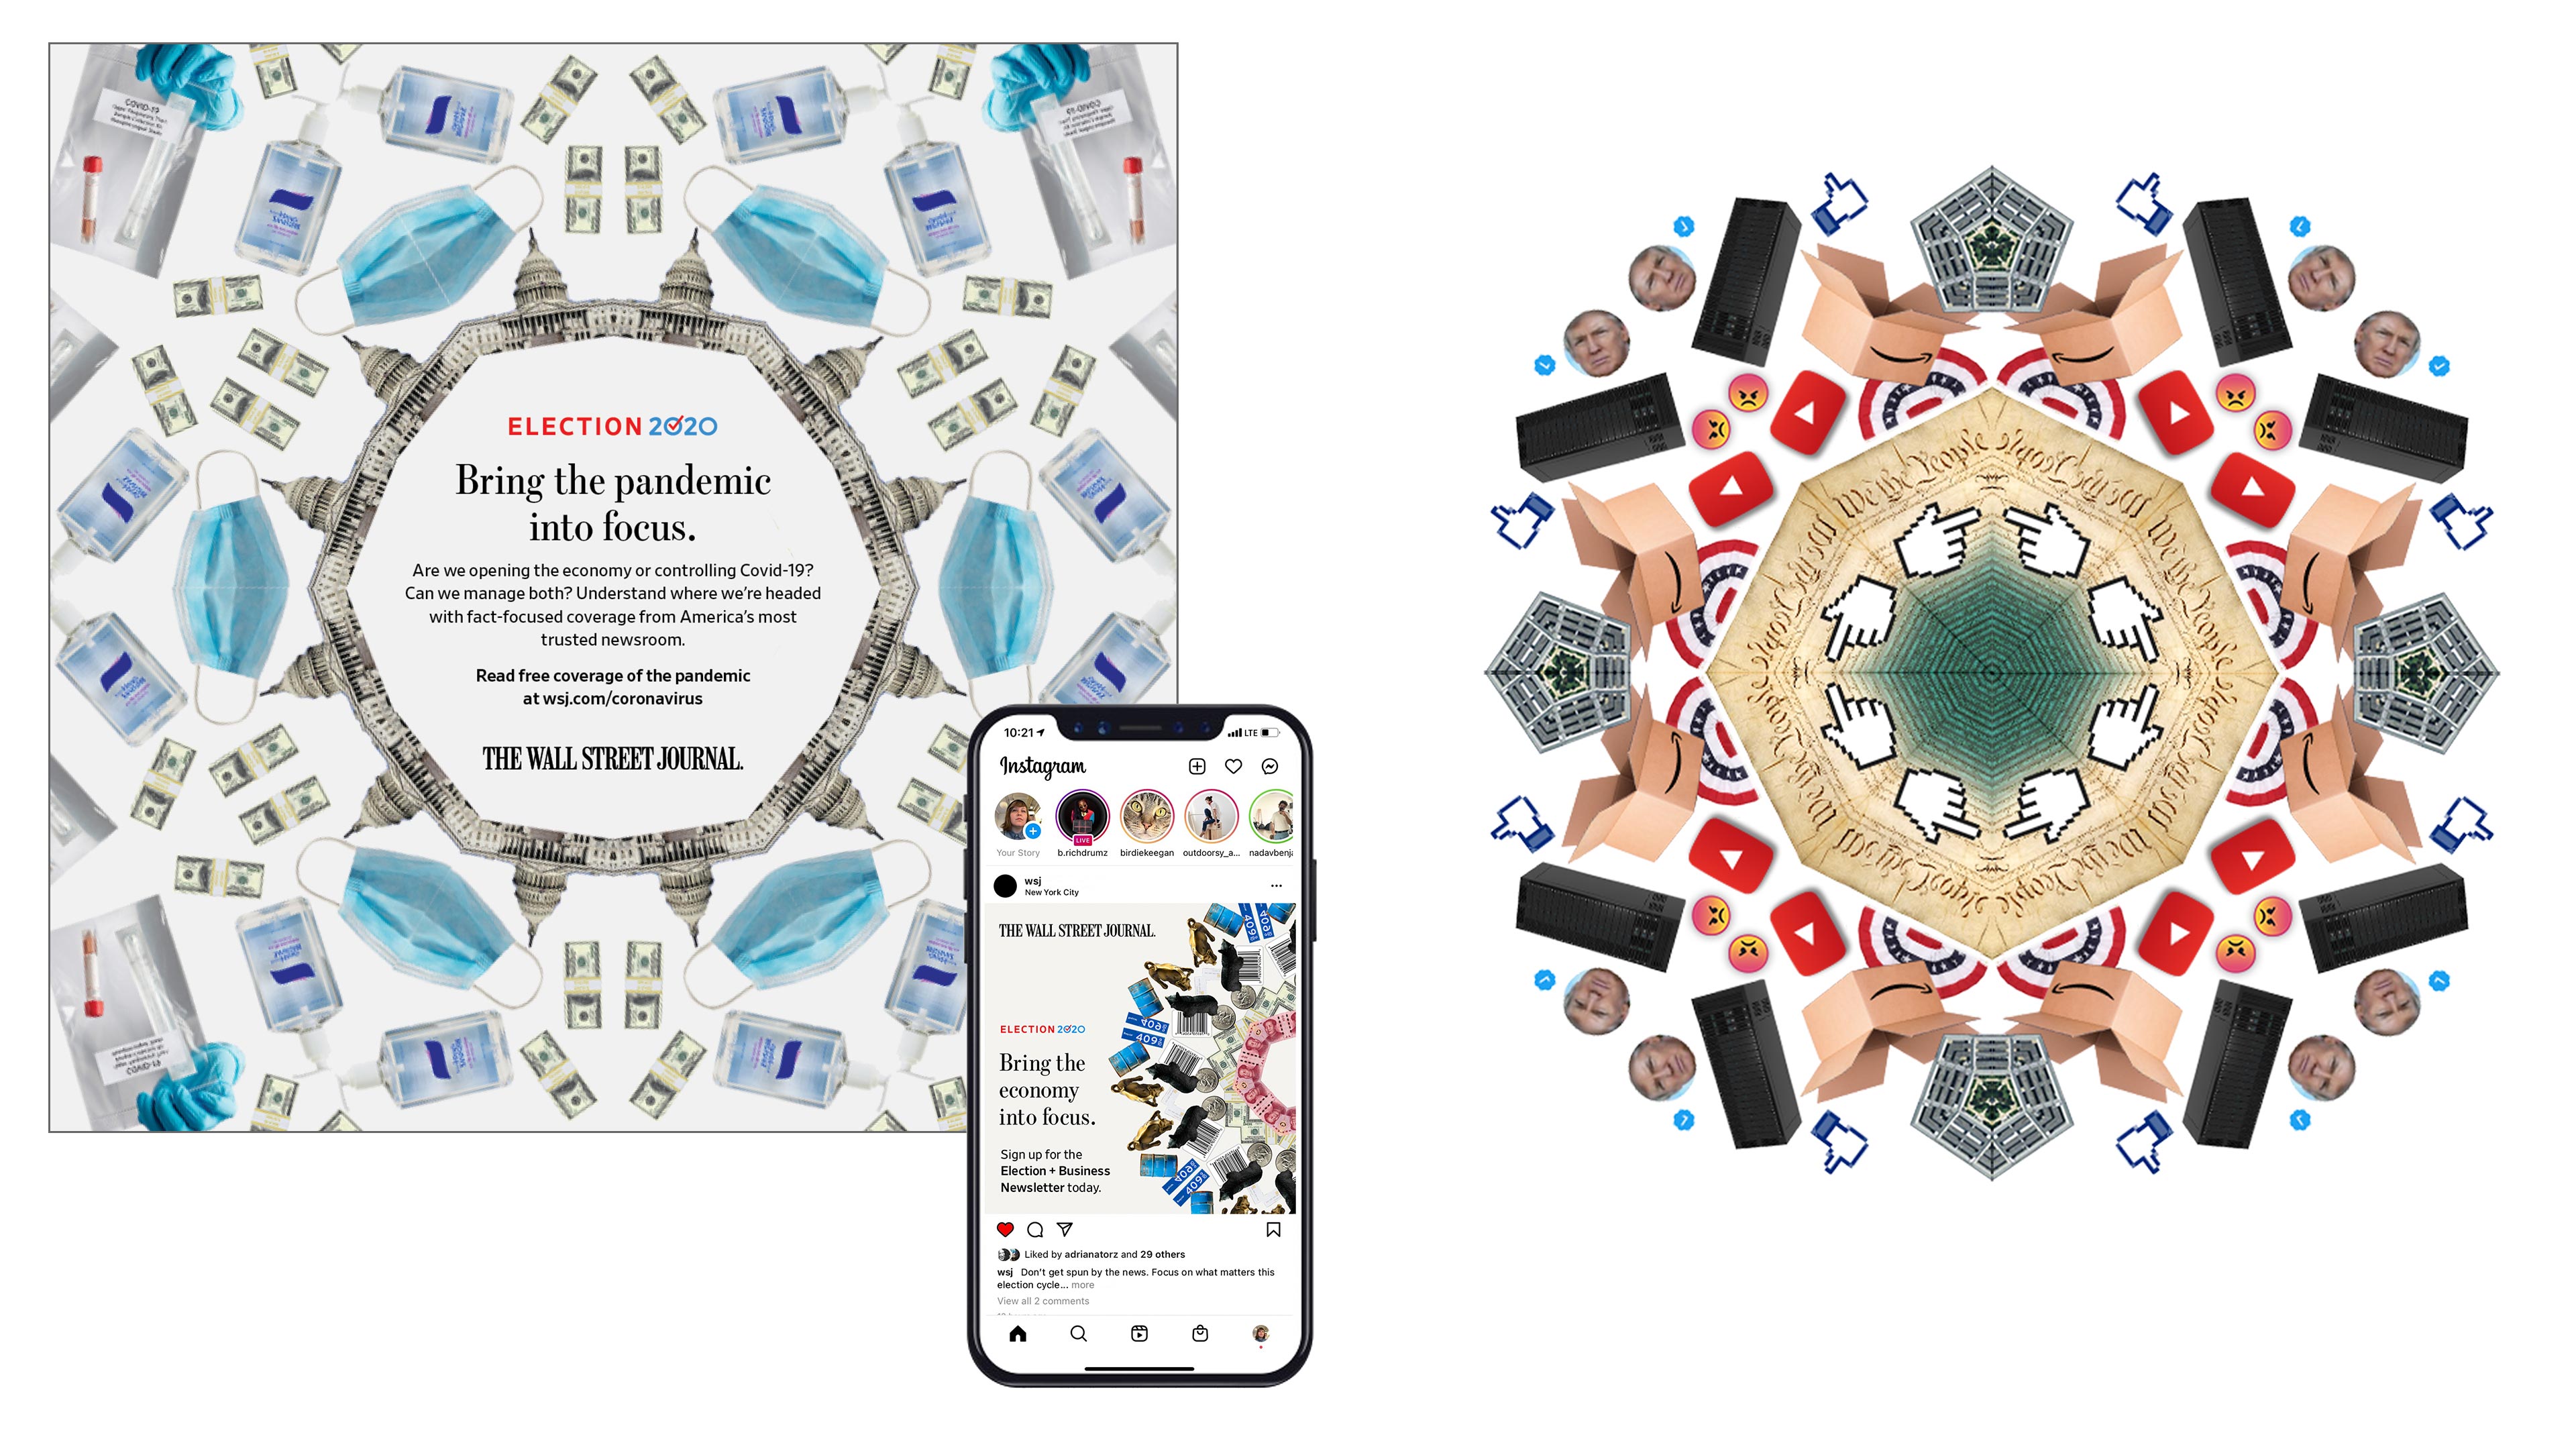 Kaleidoscope concept for making sense of 2020 election reporting